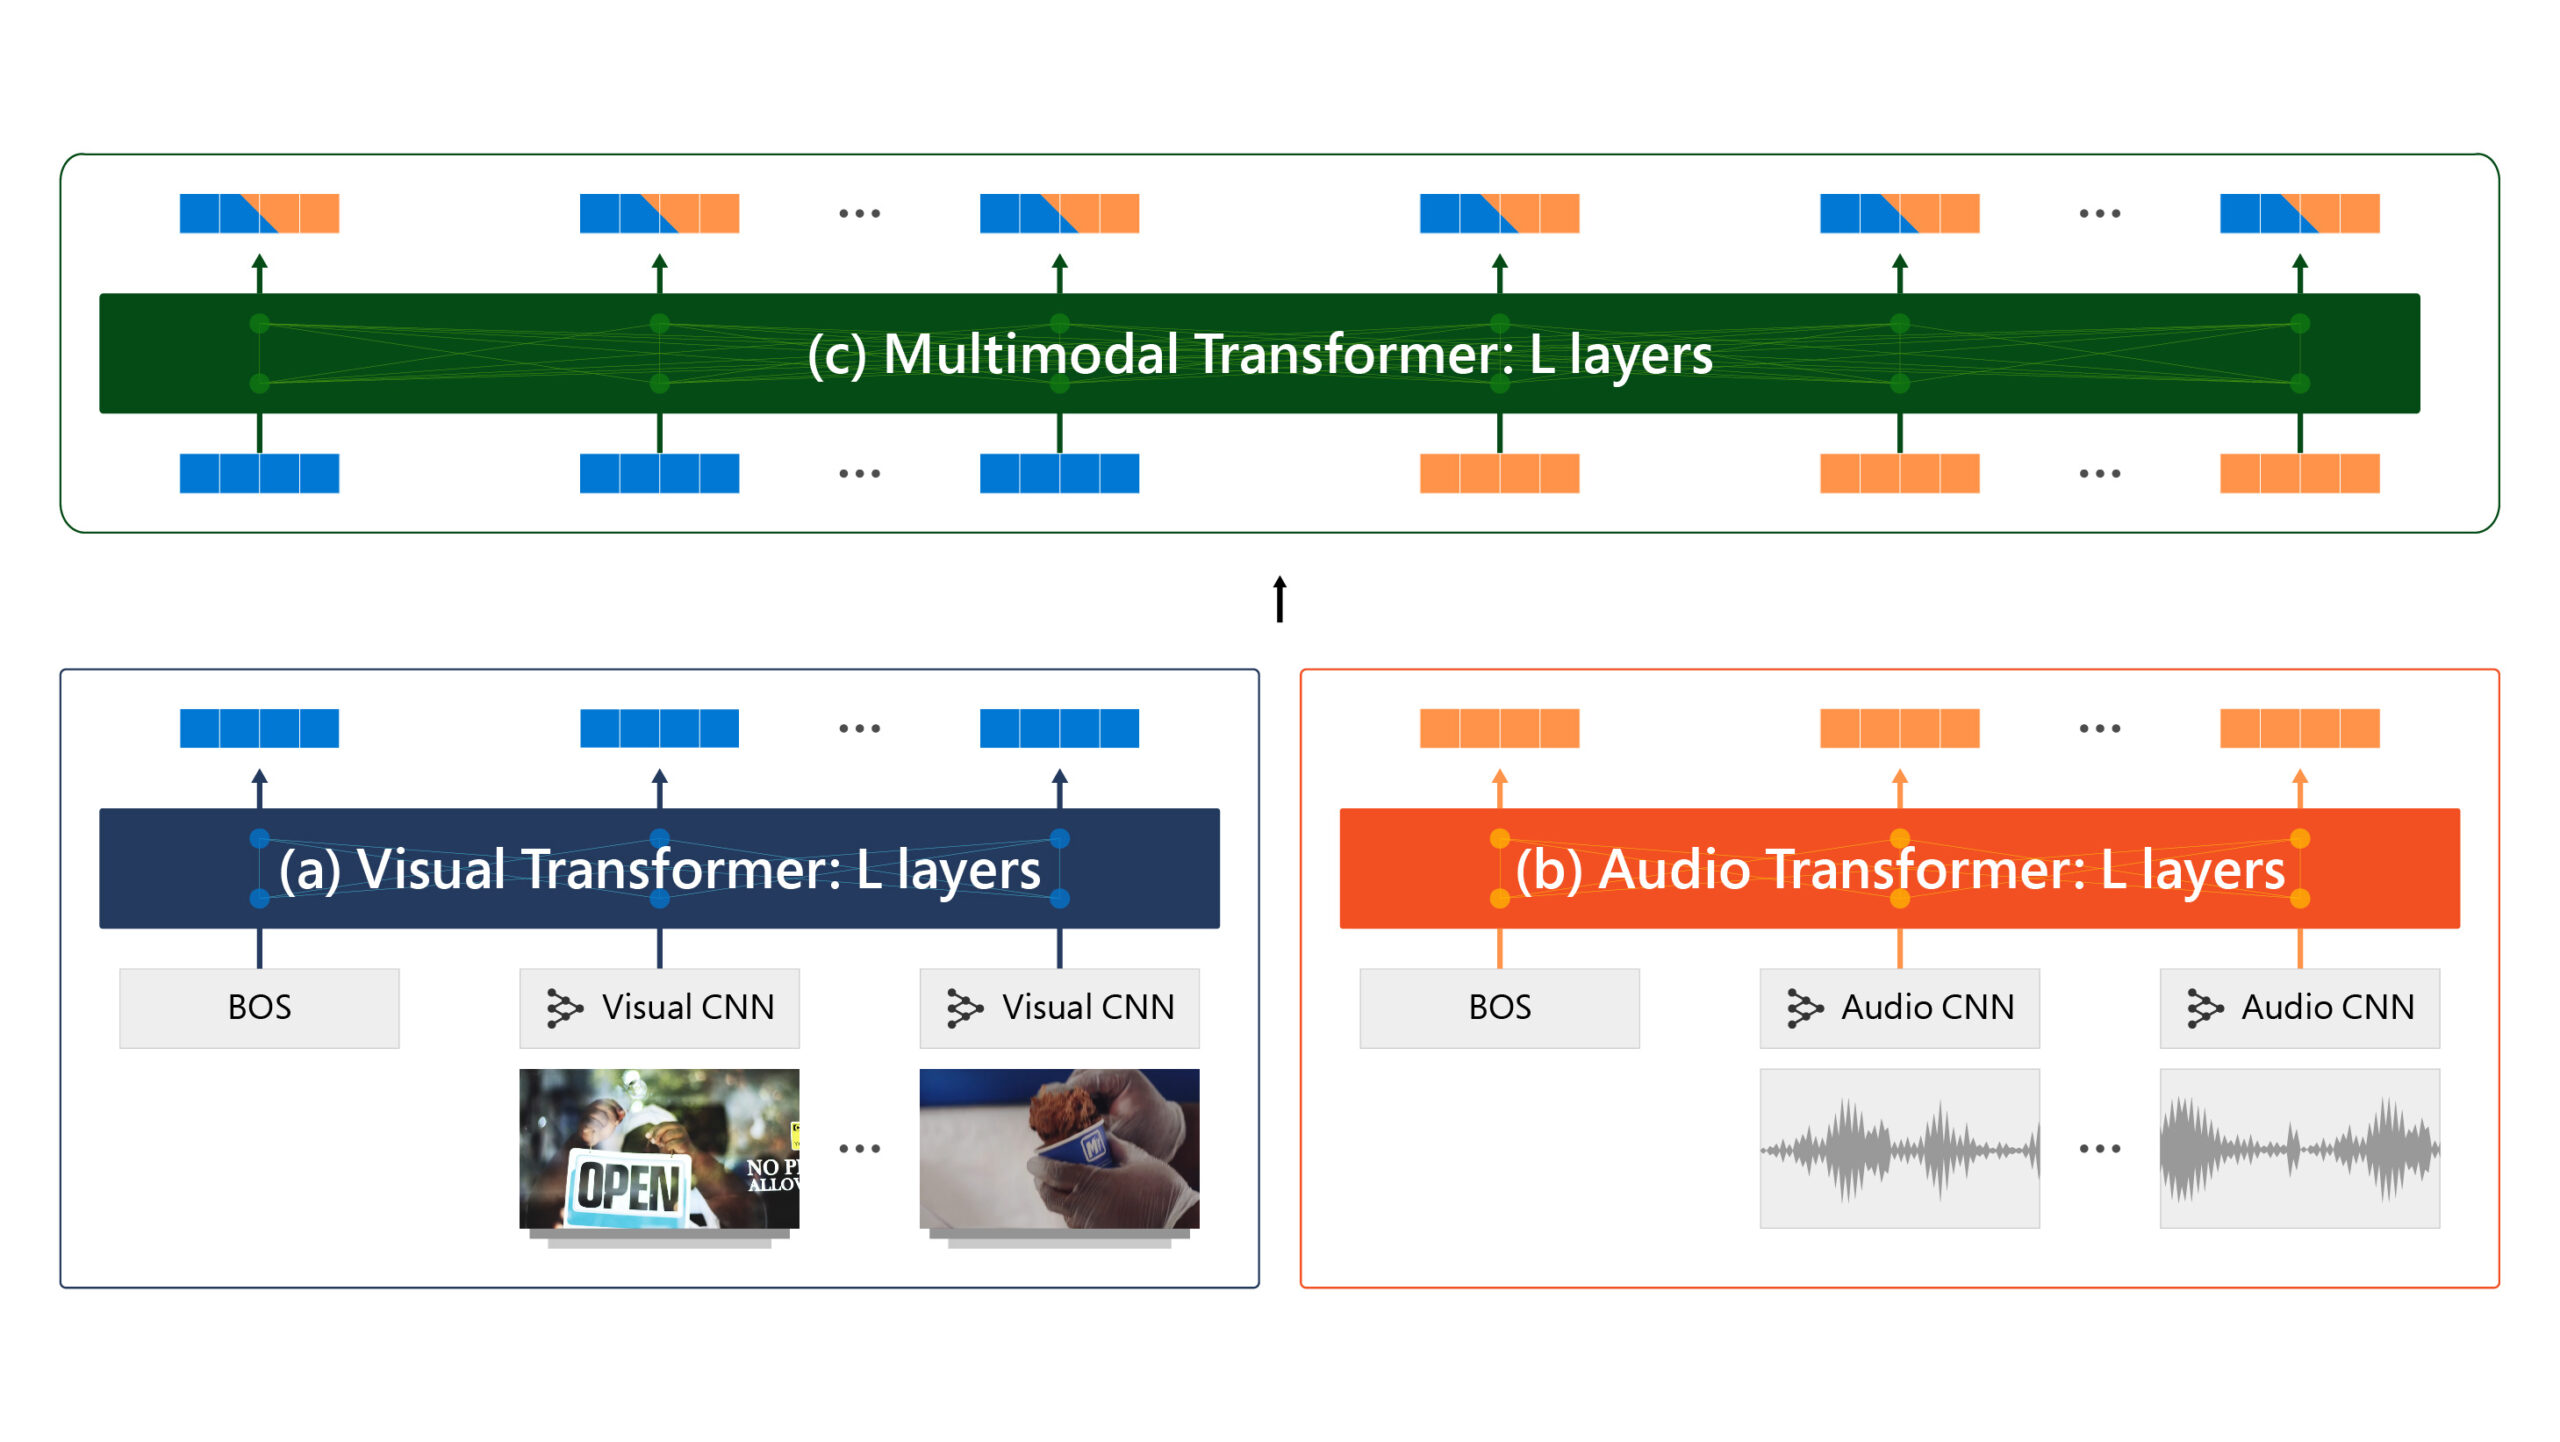 Microsoft and Nvidia describe a more efficient training model for AI working on video sequences using multimodal transformers. Microsoft and Nvidia ar